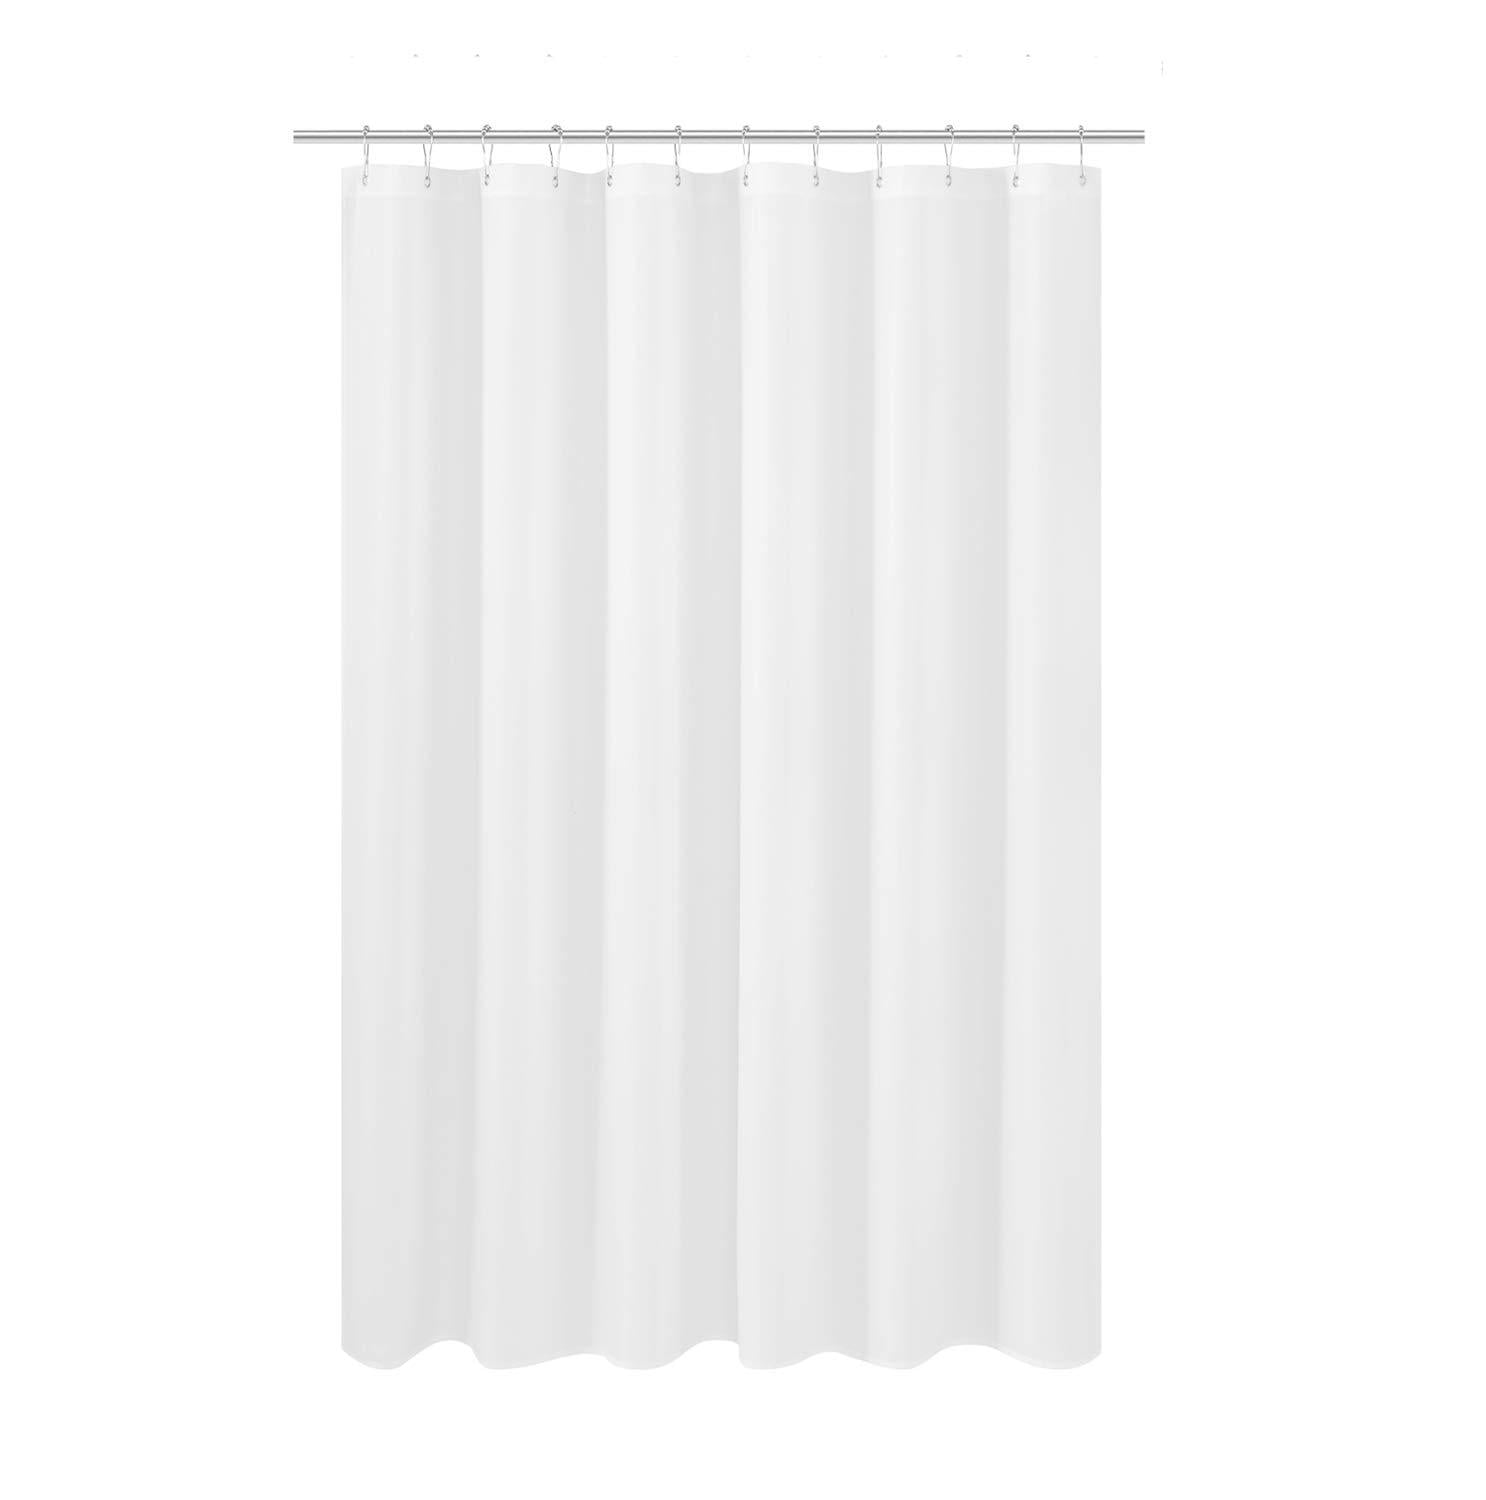 Details about   N&Y HOME Fabric Shower Curtain Liner Solid White with Magnets Hotel Quality M... 